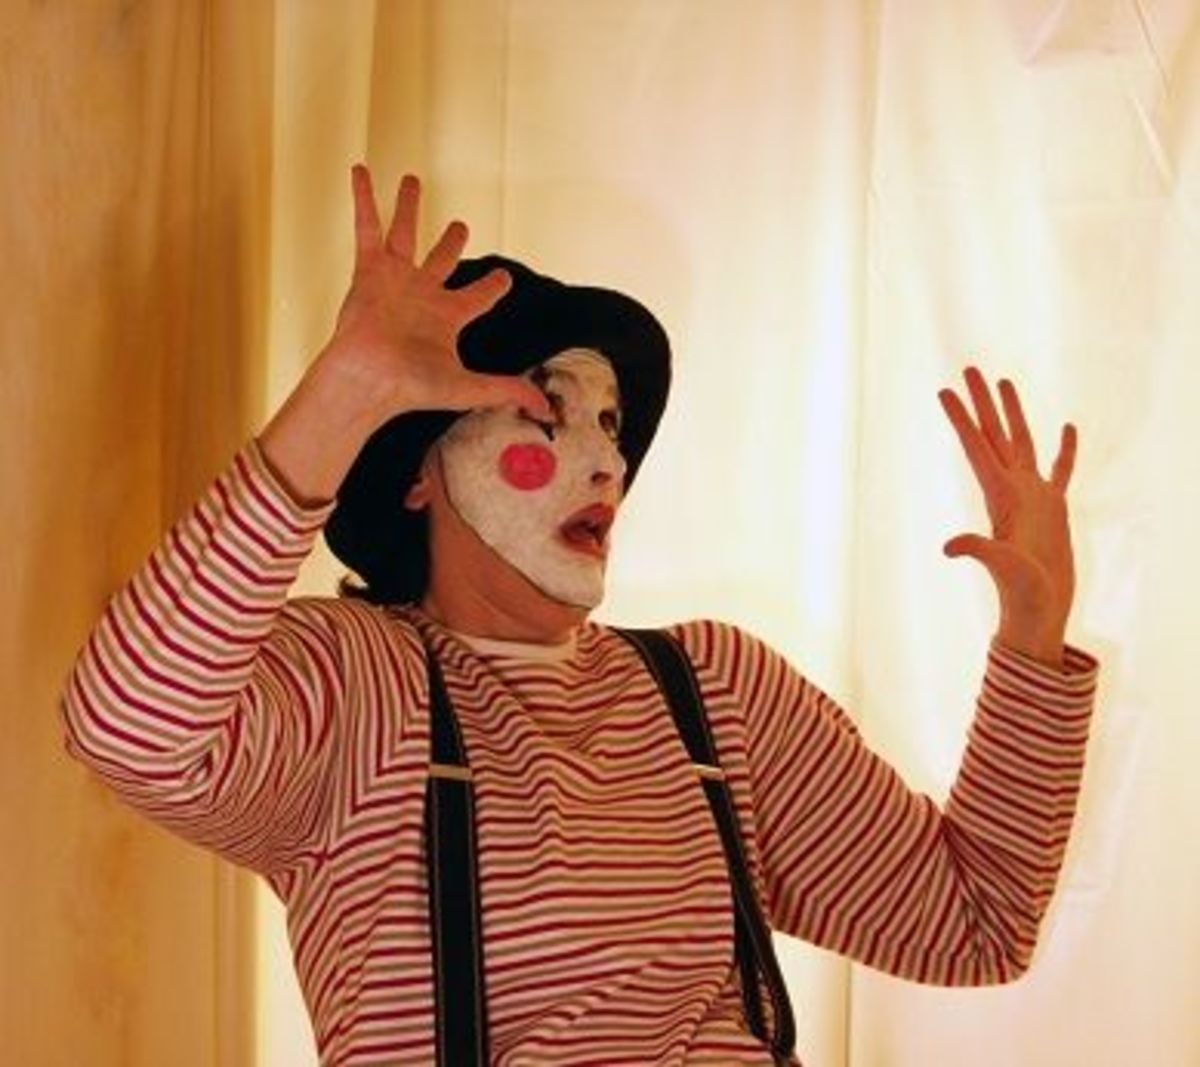 A few years after the autism diagnosis I took up miming for fun and to cope with stress.